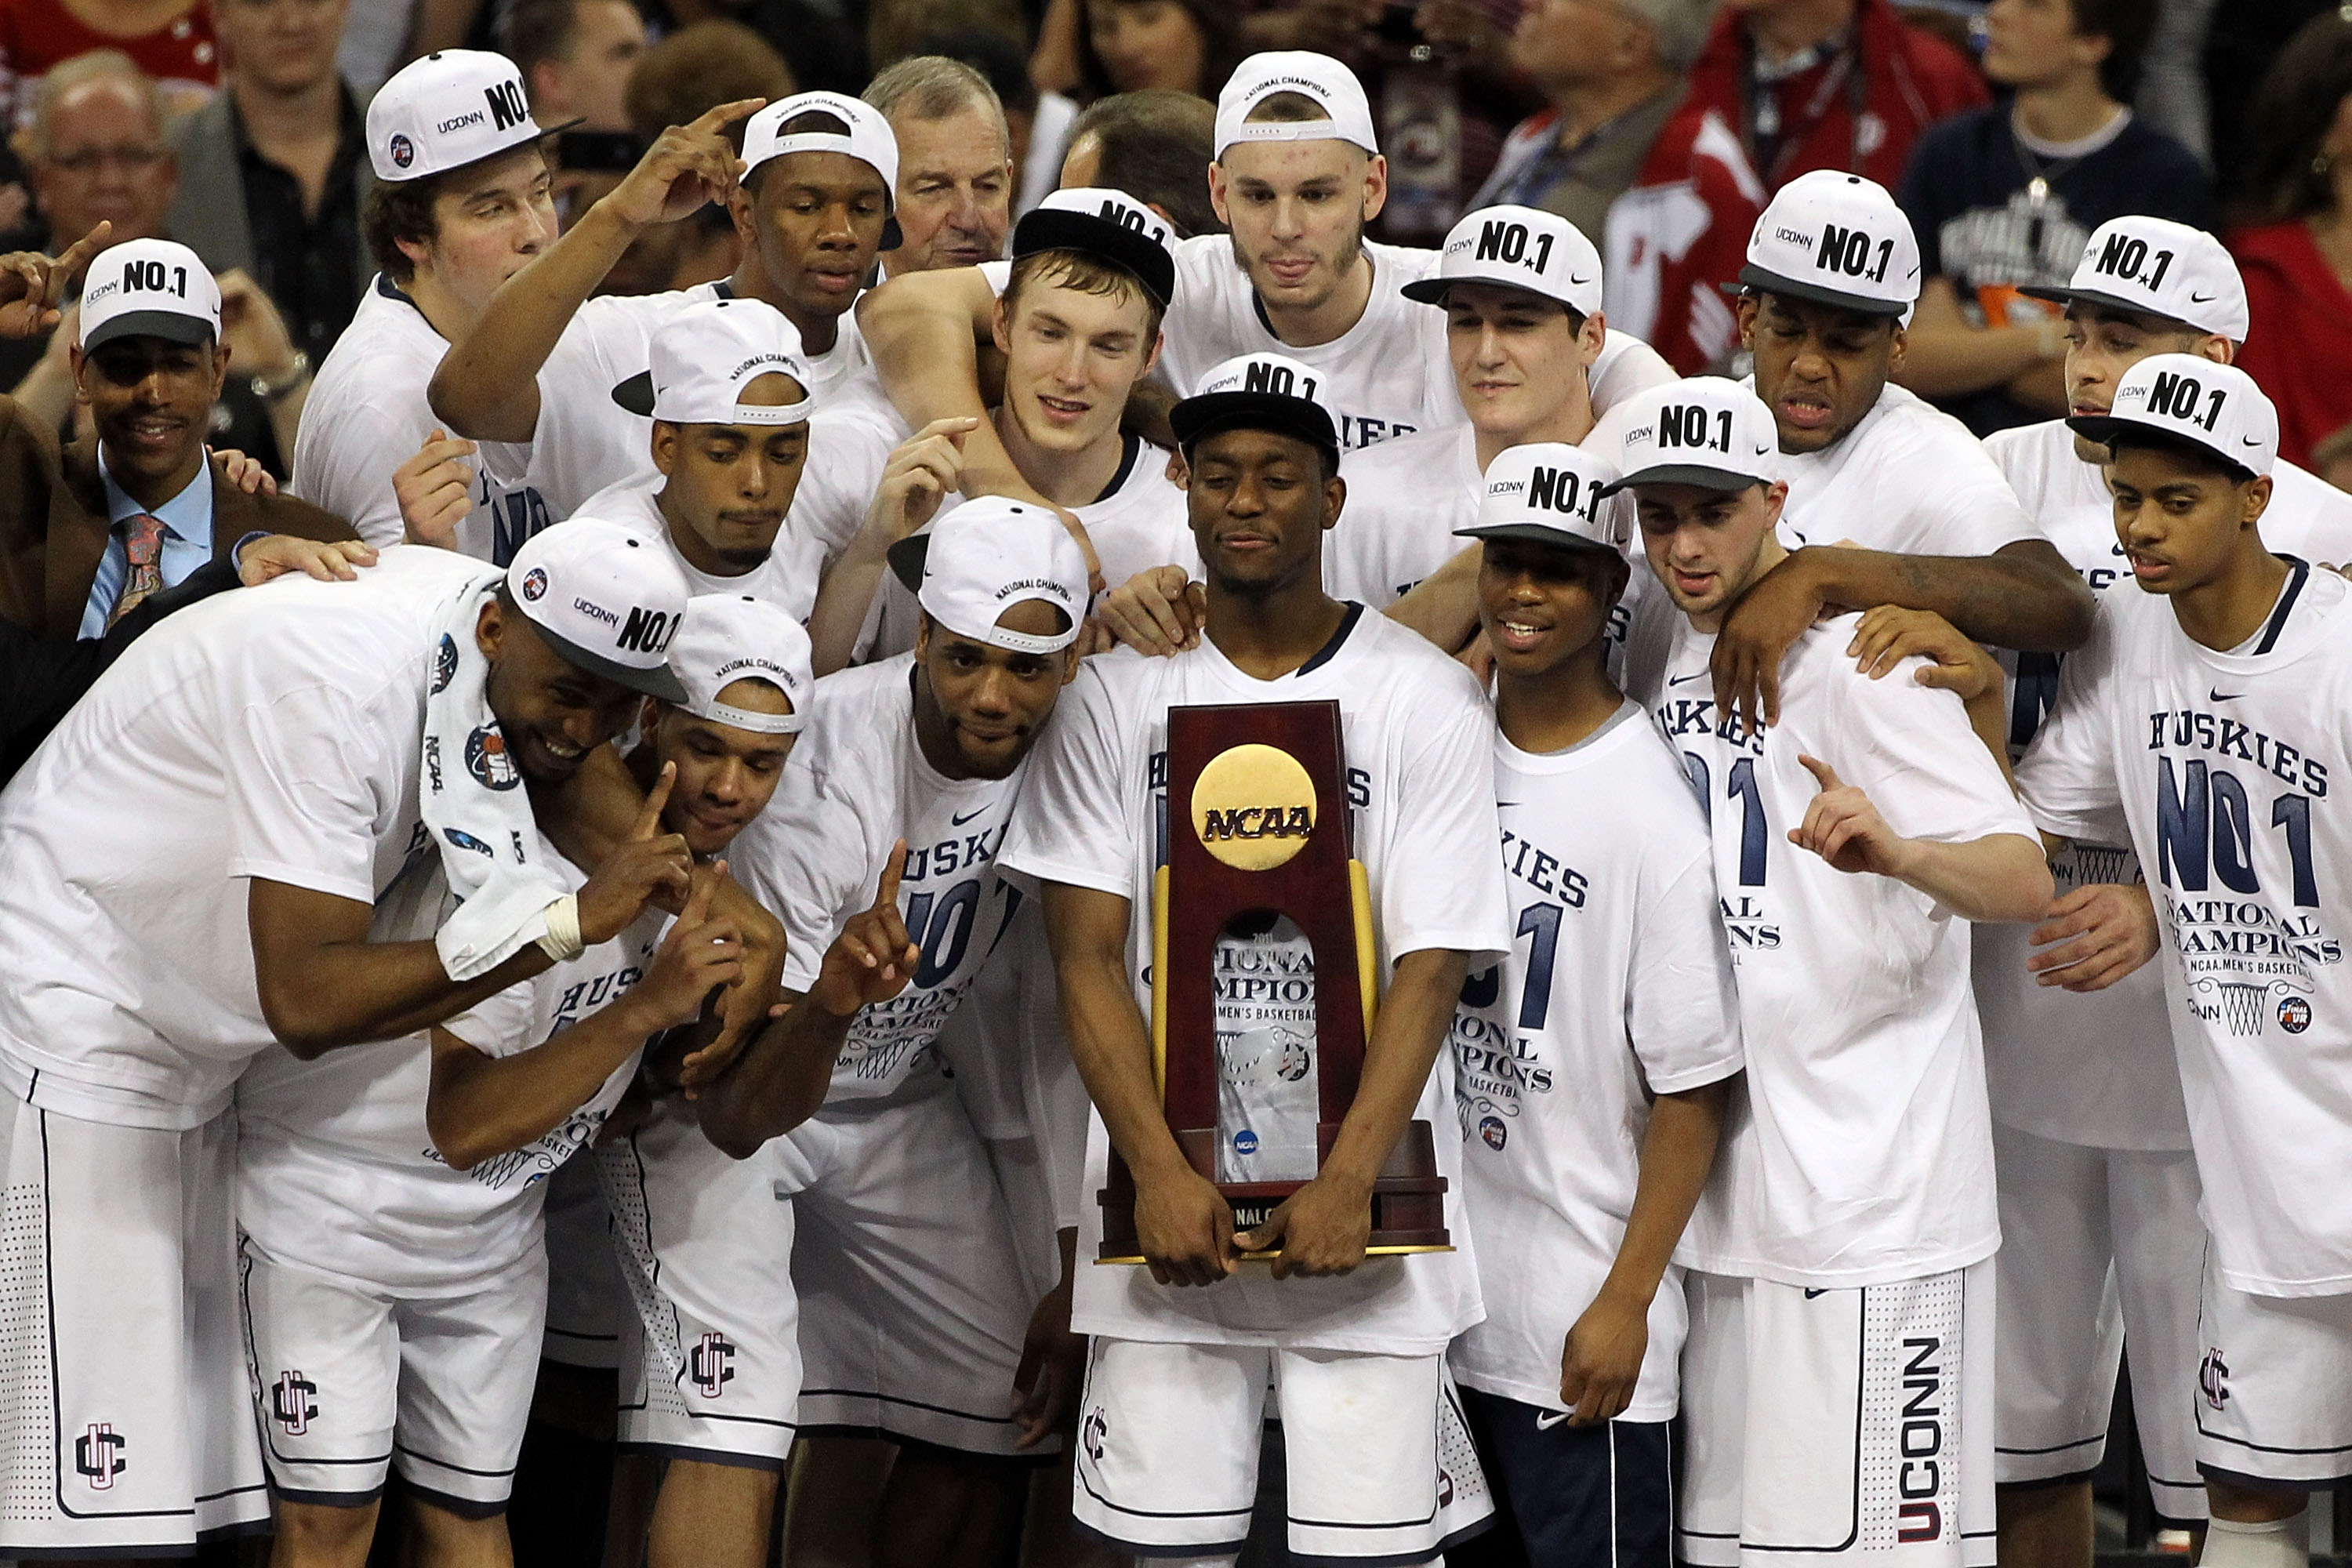 ButlerUConn and the Worst Championship Games in Sports History News